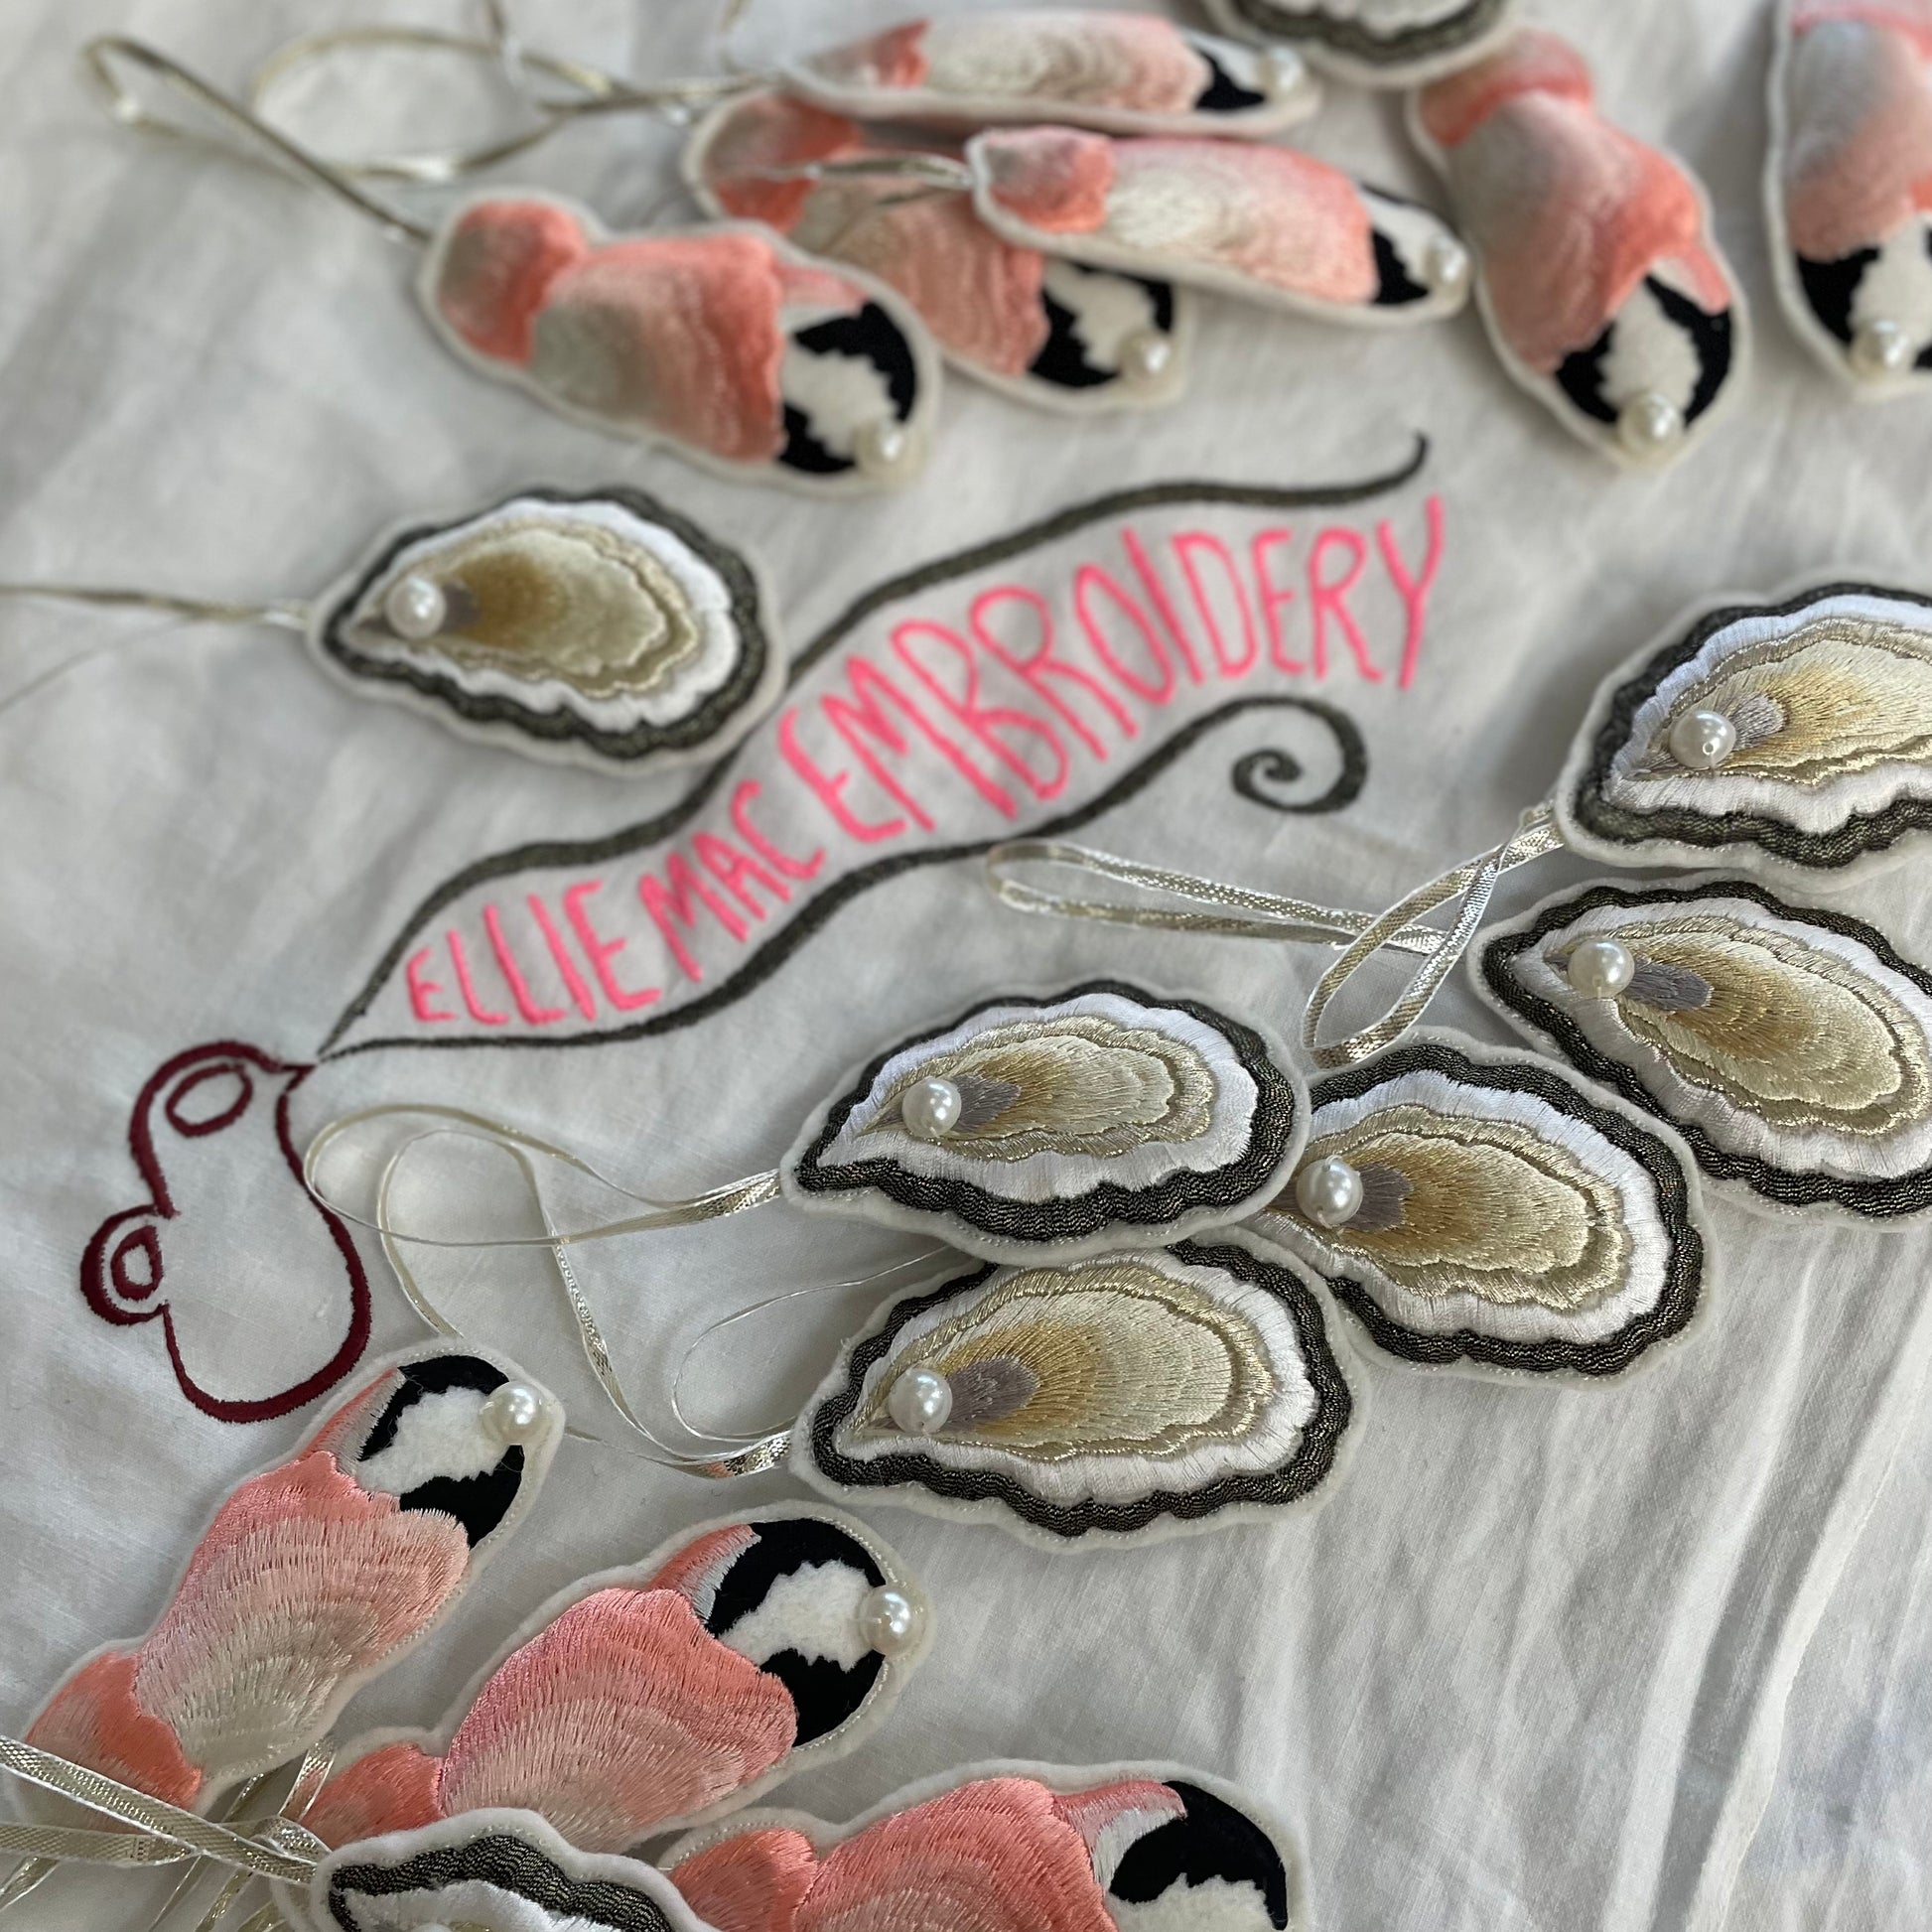 White cloth with Ellie Mac Embroidery sewn on and a selection of embroidered decorations of oysters and crab claws laid on top